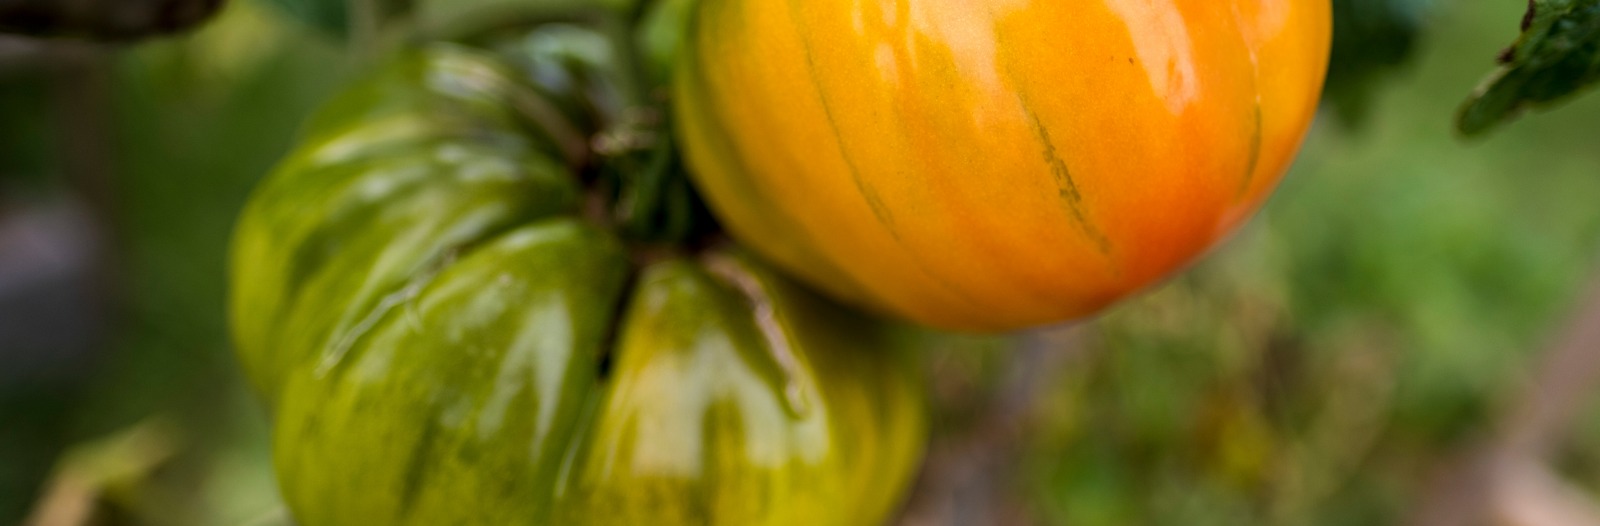 a green striped tomato on the left and yellow tomato on the right hang together from a vine